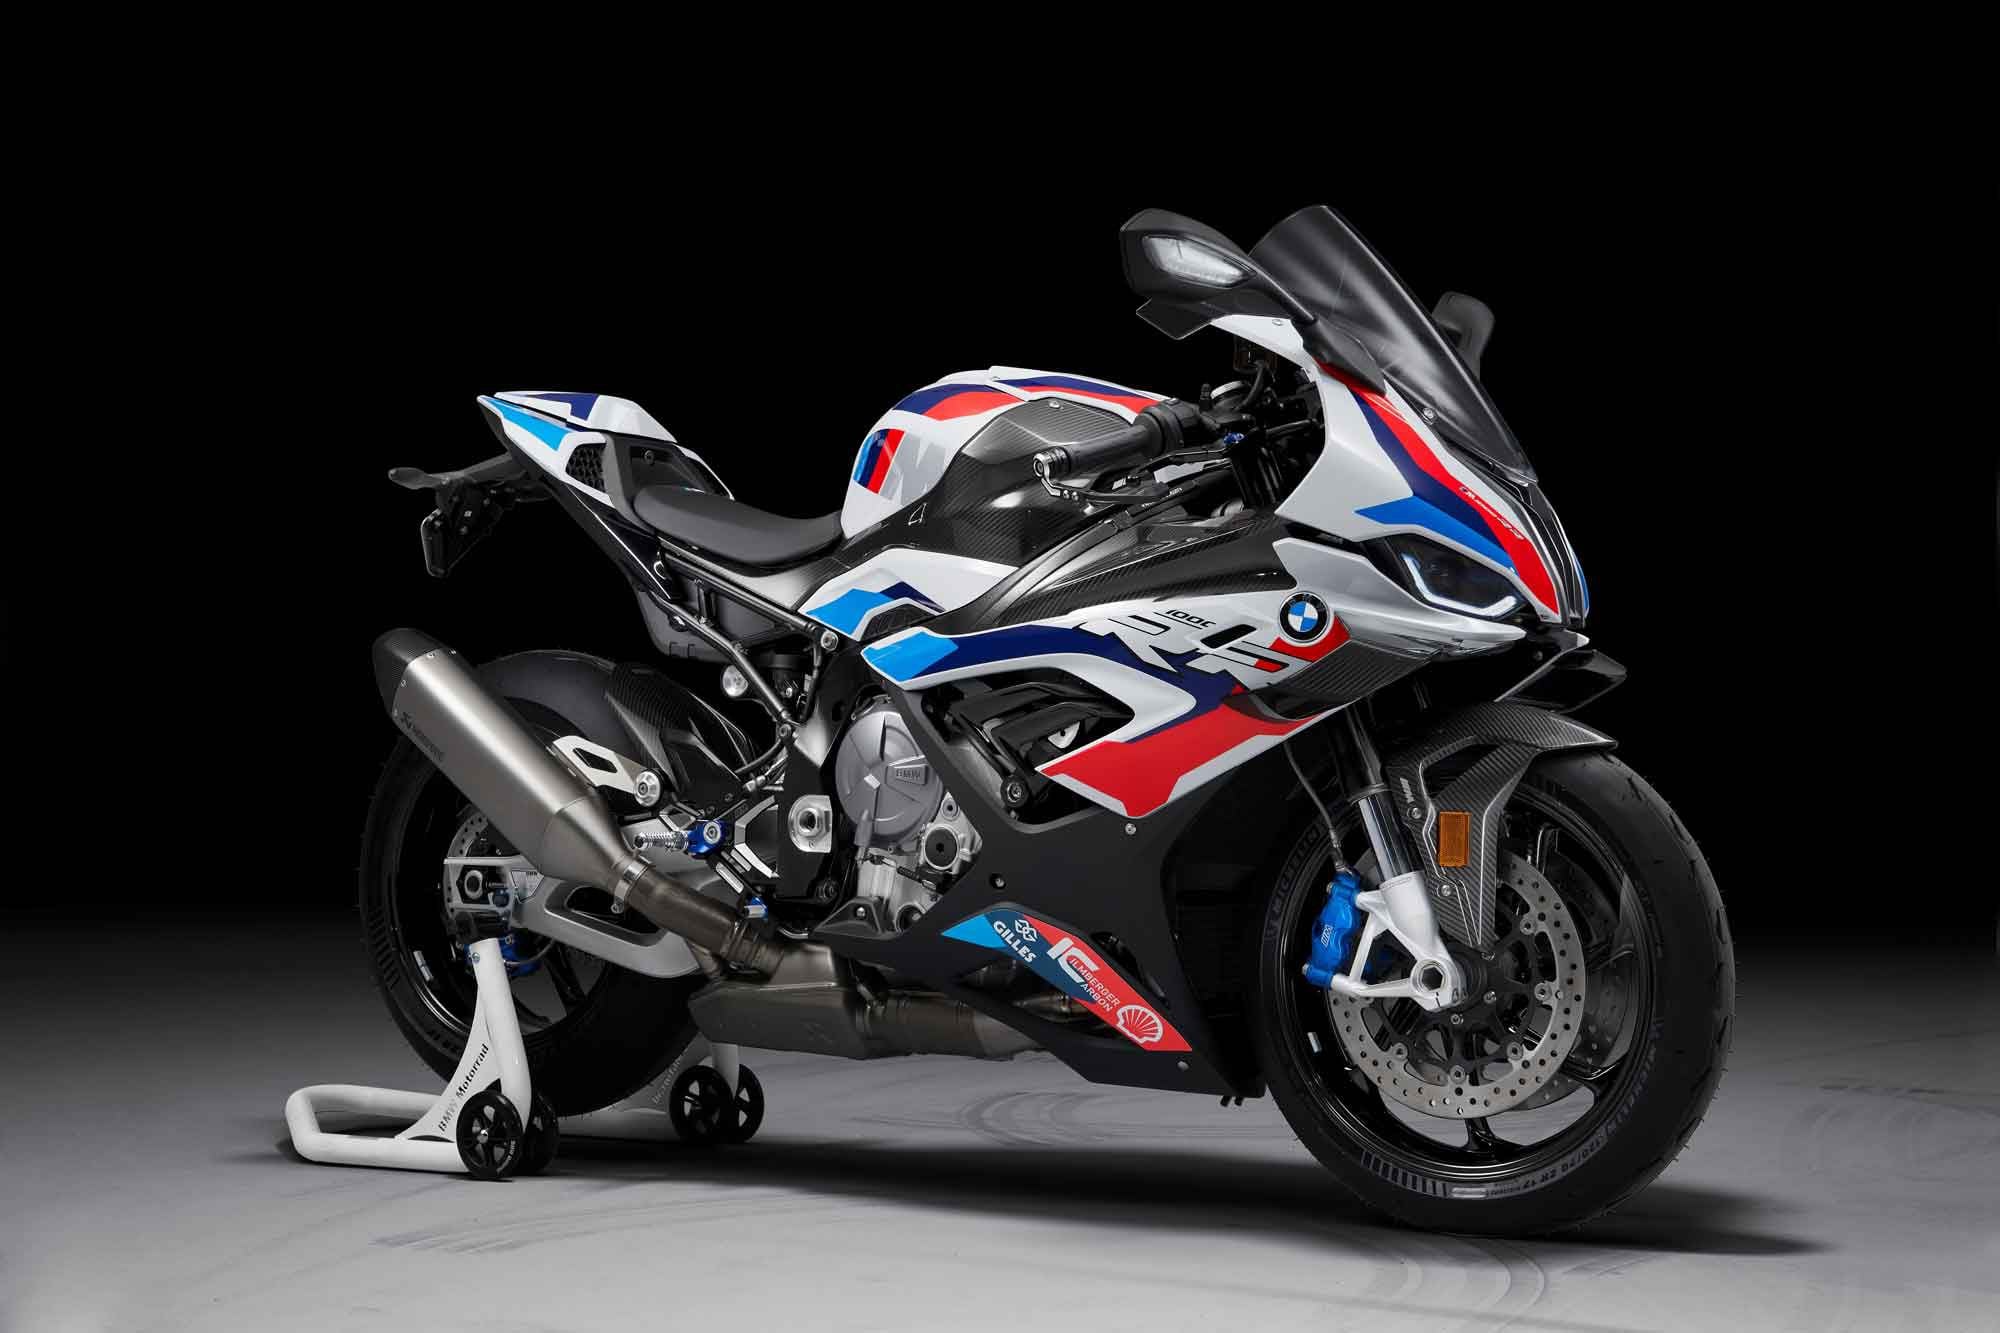 It’s remarkable how many improvements the Motorrad team made to its M 1000 RR versus the standard RR.